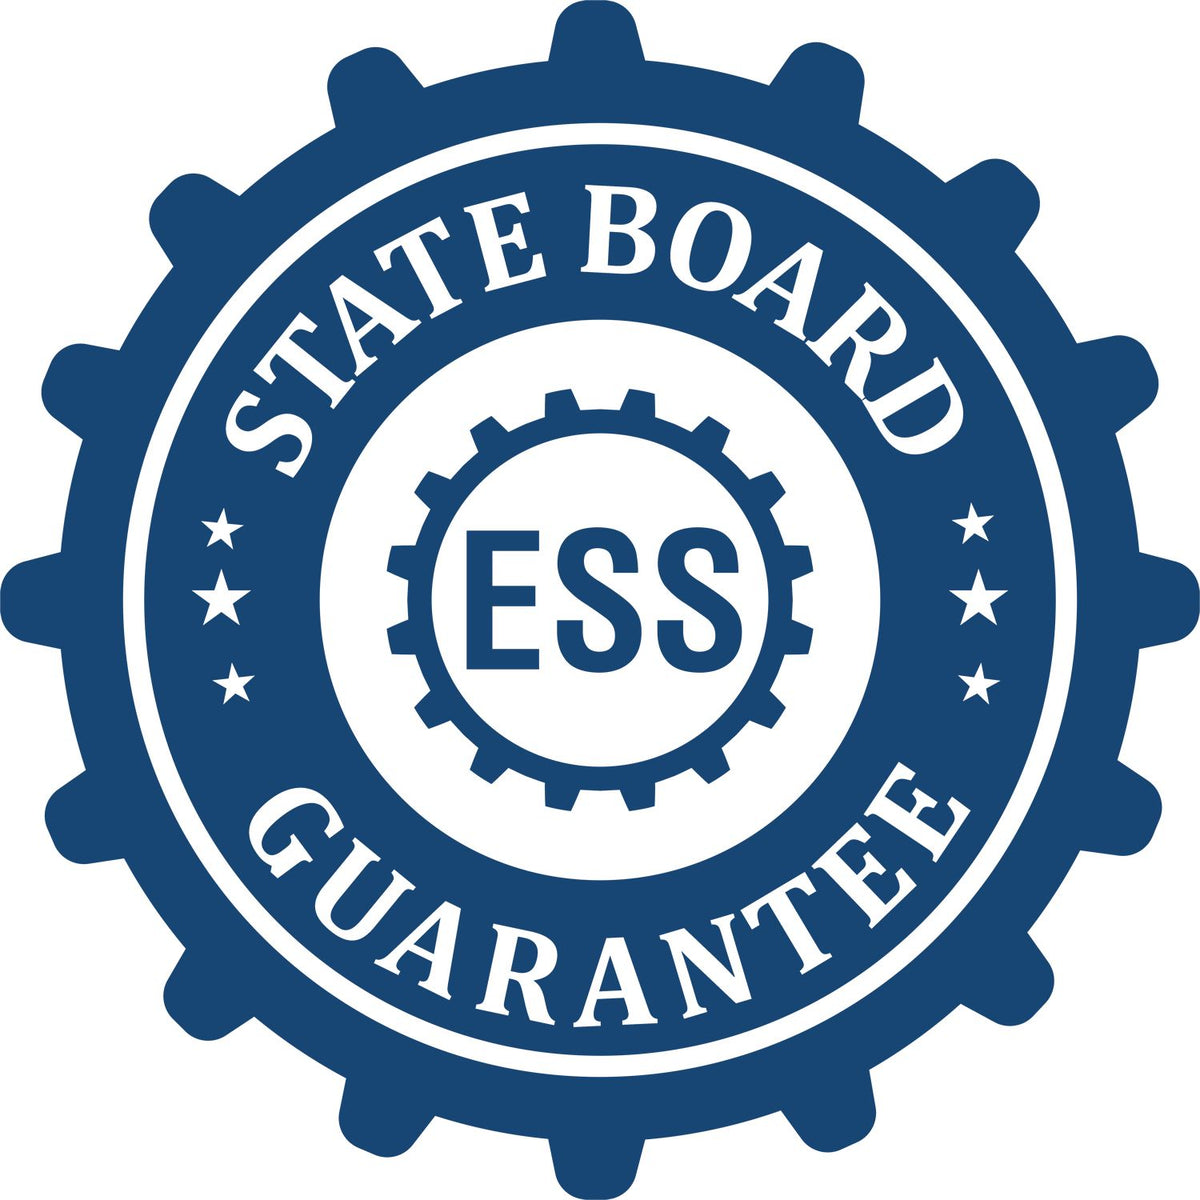 An emblem in a gear shape illustrating a state board guarantee for the Digital Florida Landscape Architect Stamp product.